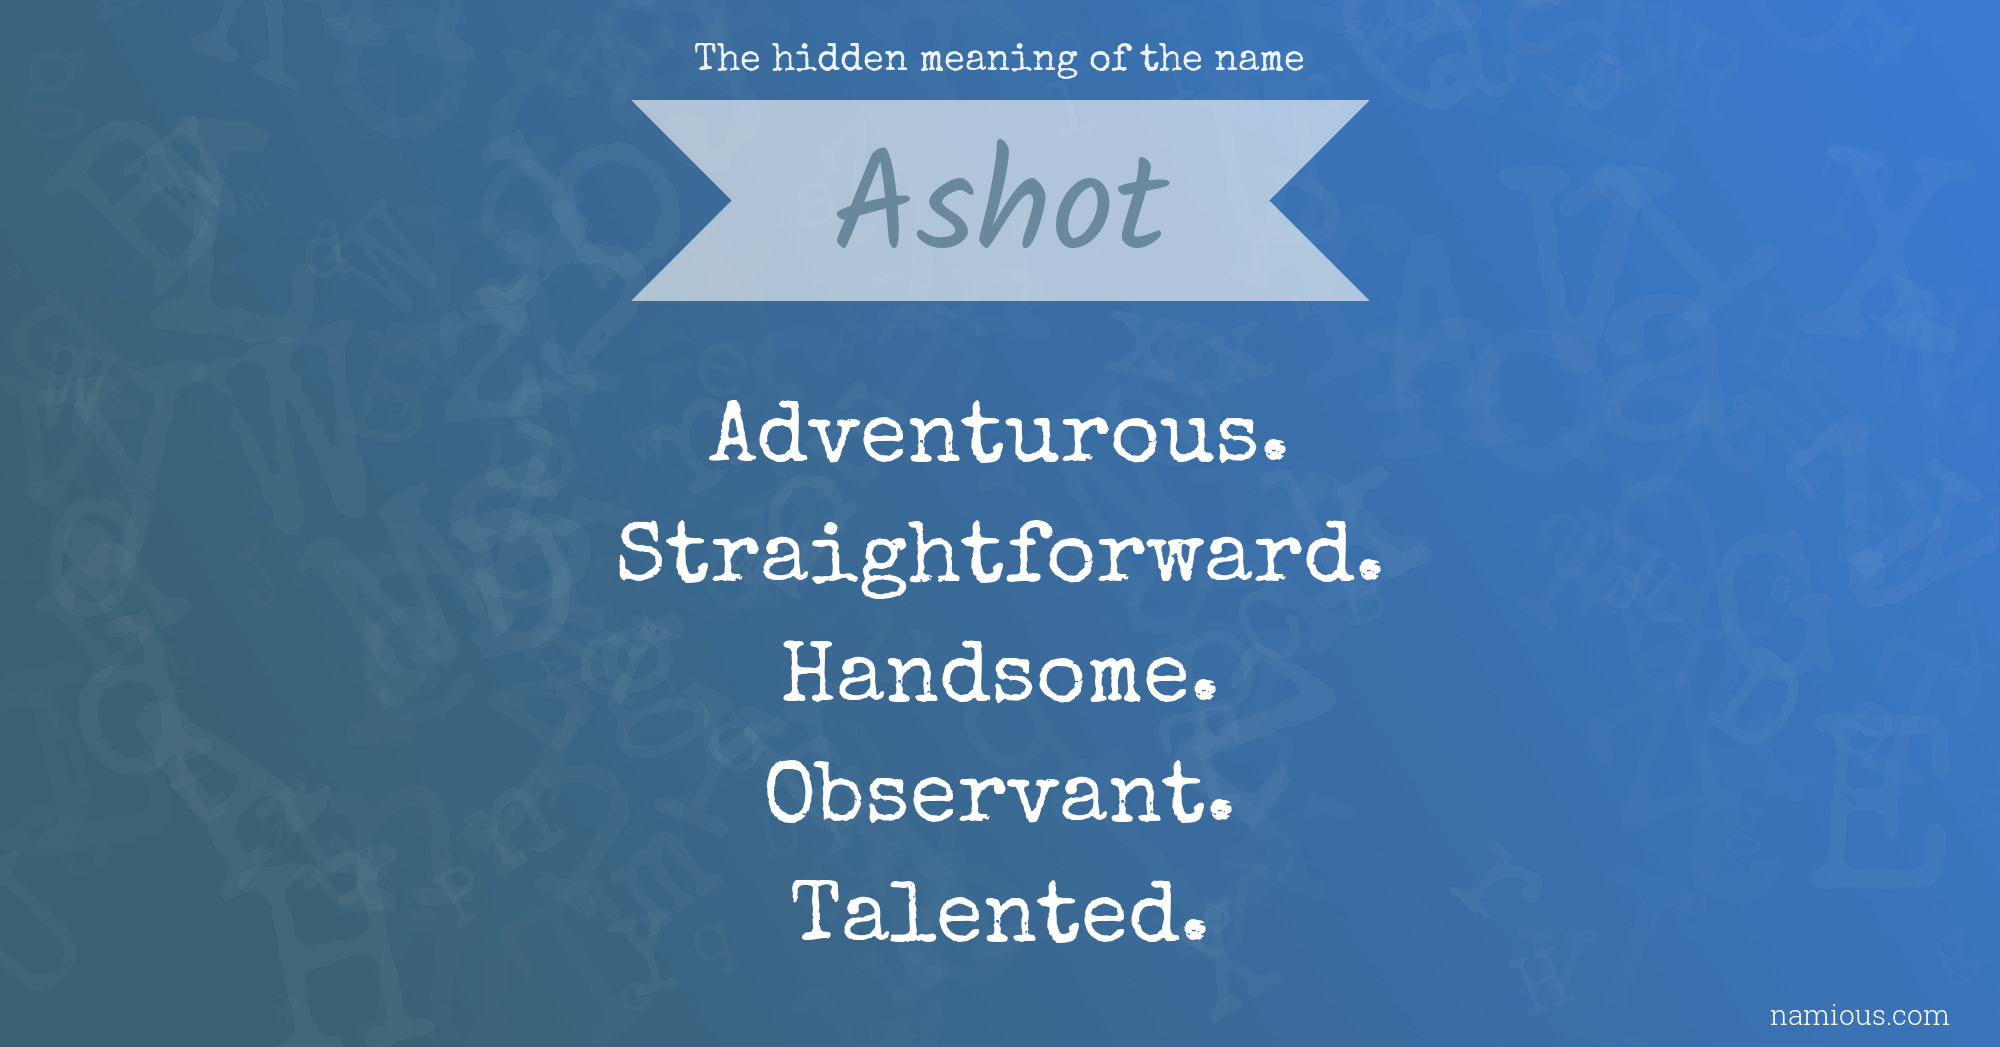 The hidden meaning of the name Ashot